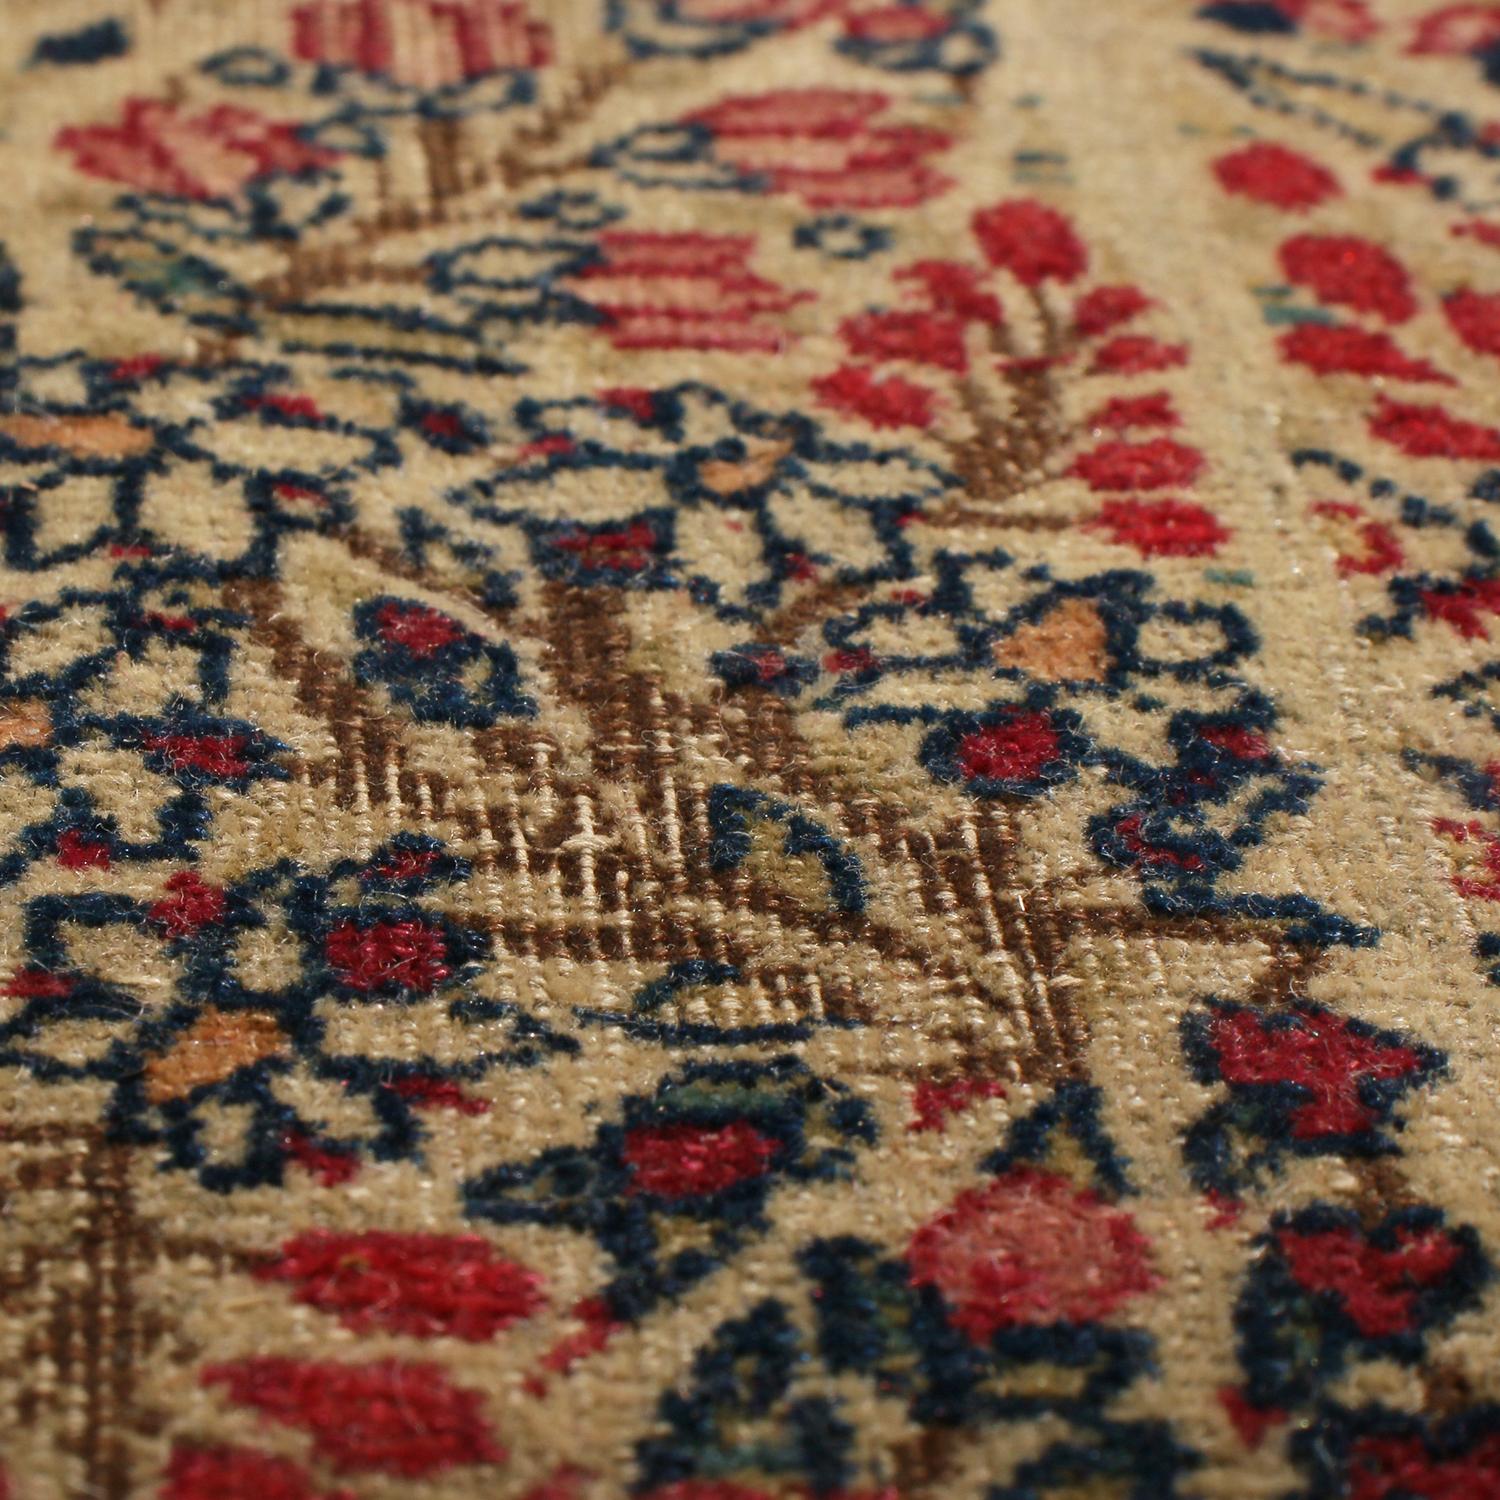 Late 19th Century Antique Kerman Lavar Red and Blue Wool Persian Rug